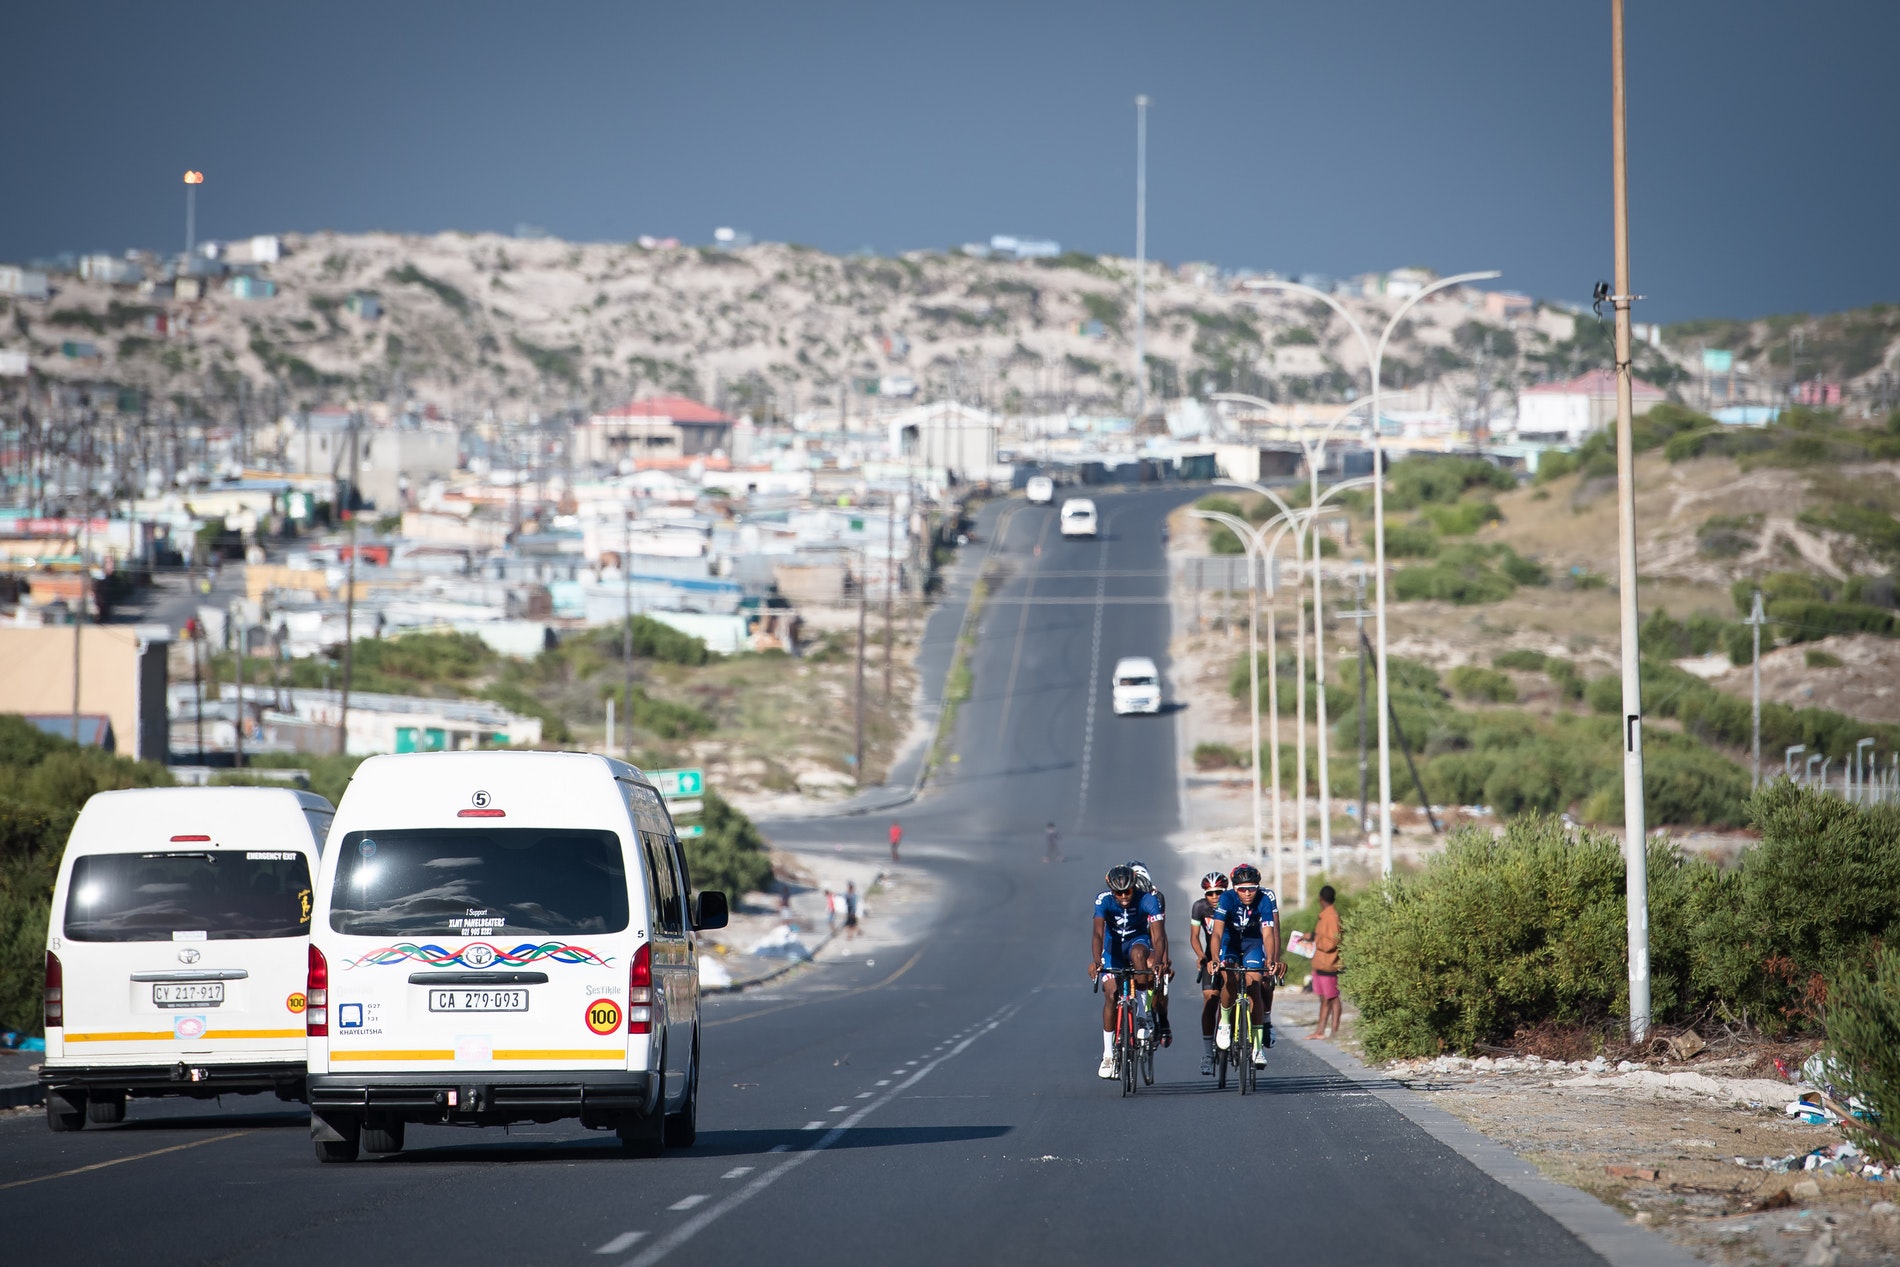 Velokhaya cyclists passing taxis on their cycle.